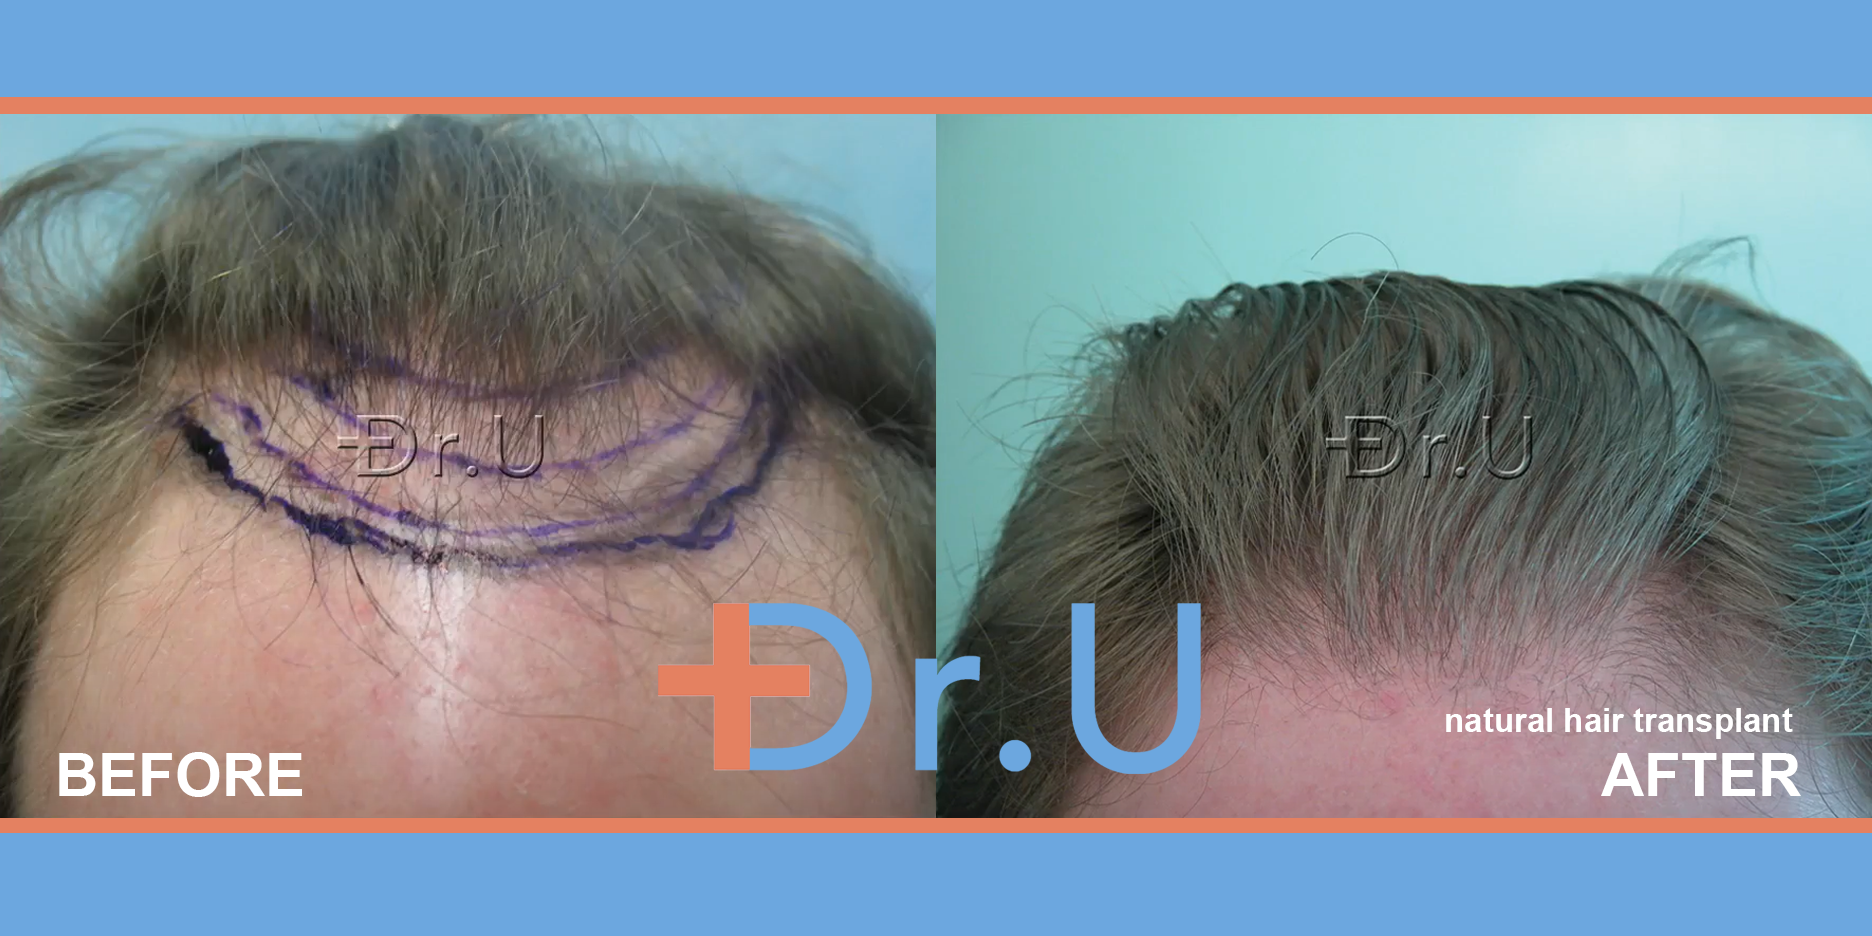 VIDEO: Mature Hair Transplant Coverage For Patient - Before and After